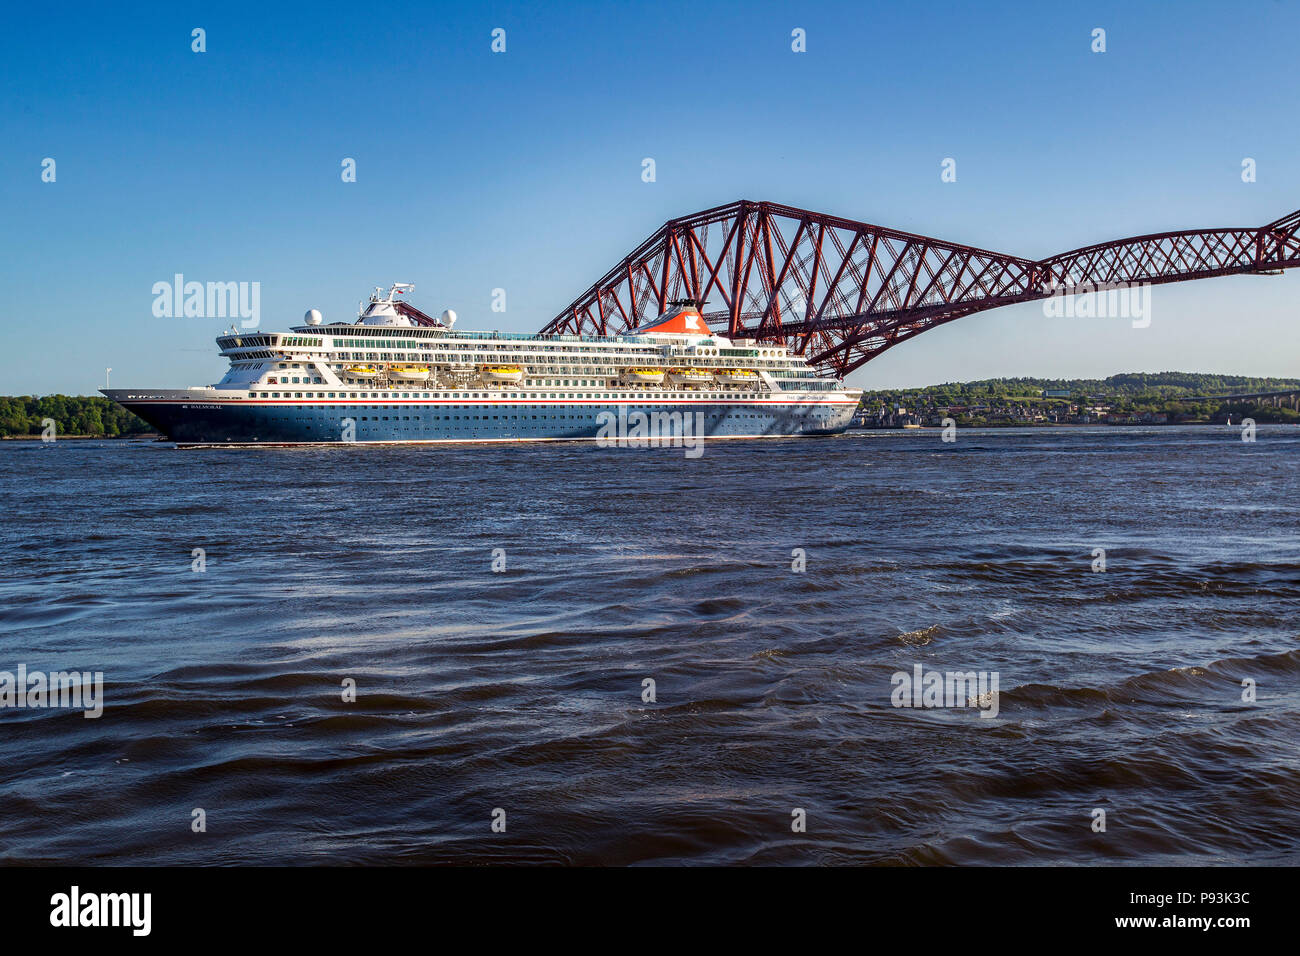 Cruise Ship Balmoral on River Forth going below the Forth Bridges Stock Photo